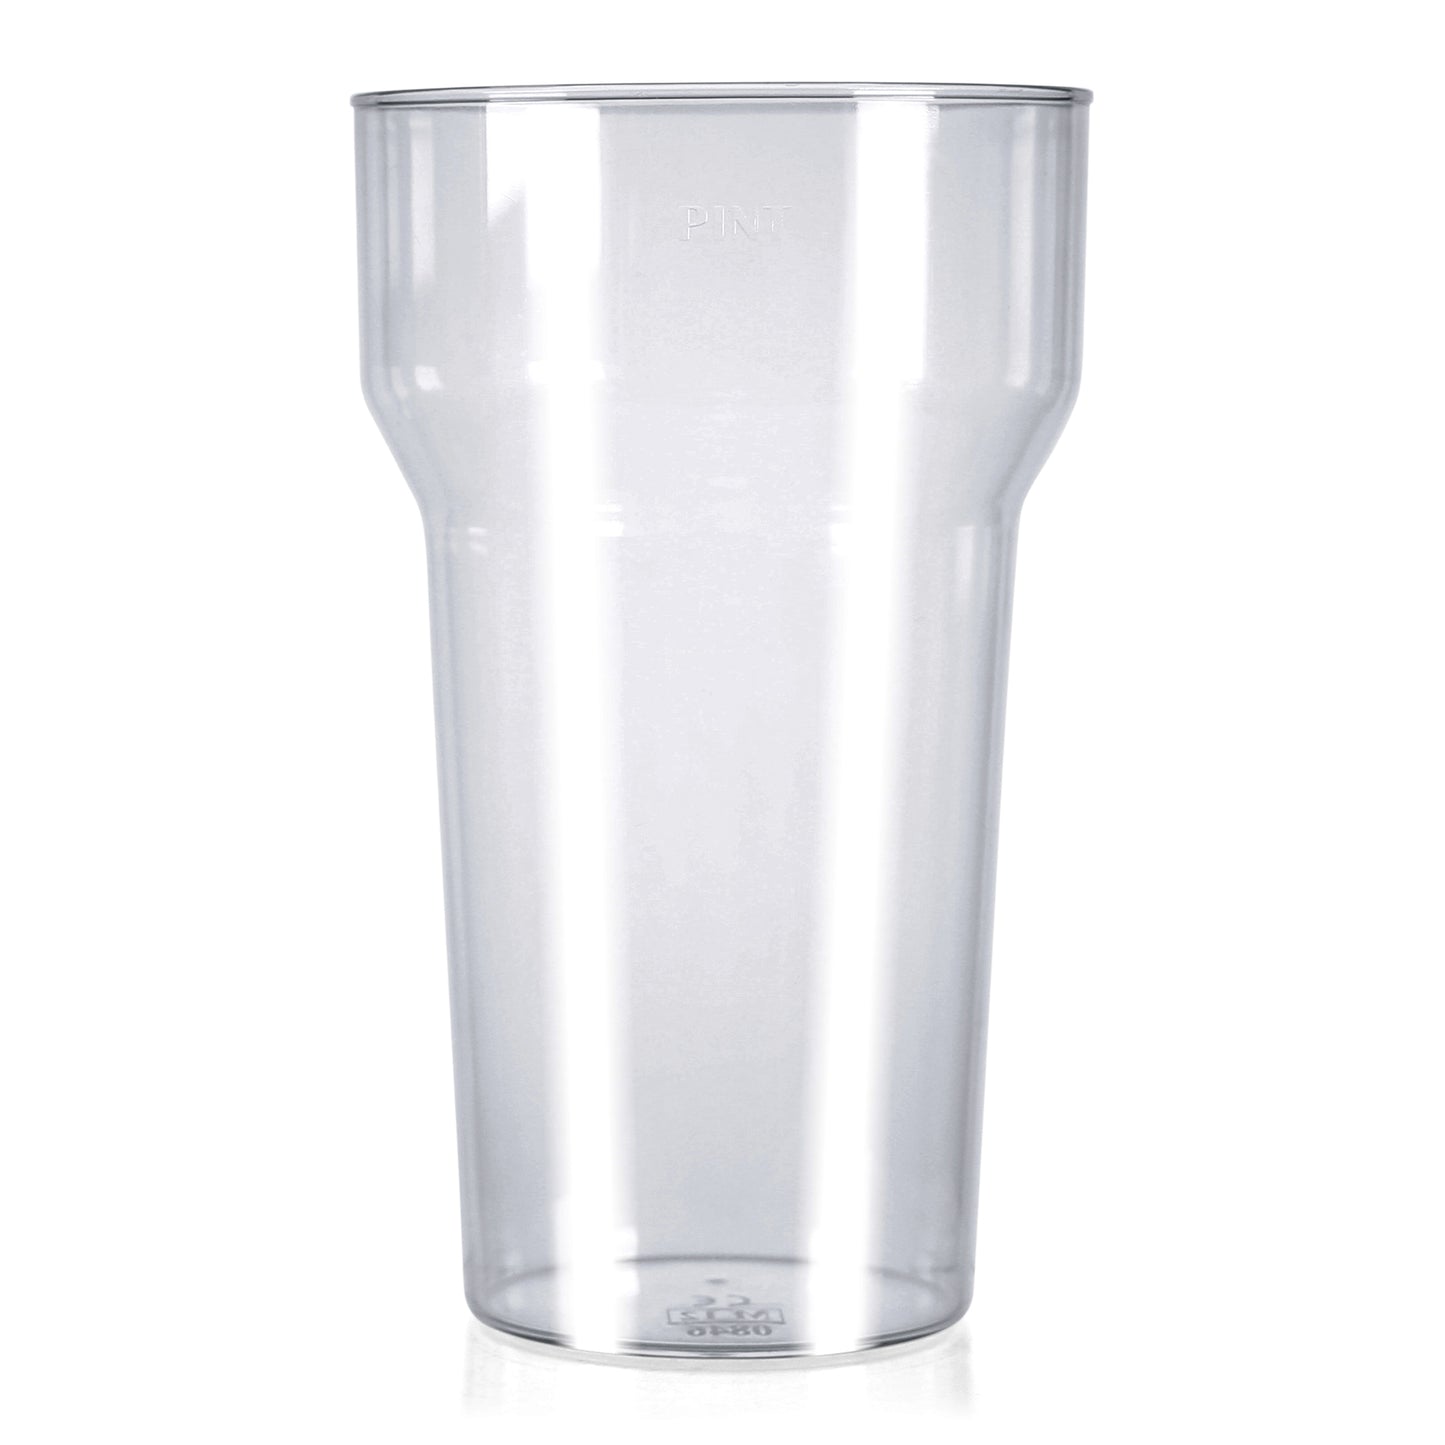 10 x Pint Glasses 568ml Transparent Clear Strong Reusable Plastic CE Marked Beer Cider Lager Drinks Stackable Dishwasher-5056020108504-PCUP-PINTx10-Product Pro-Clear, Pint, Pint Glasses, Plastic Pint Glasses